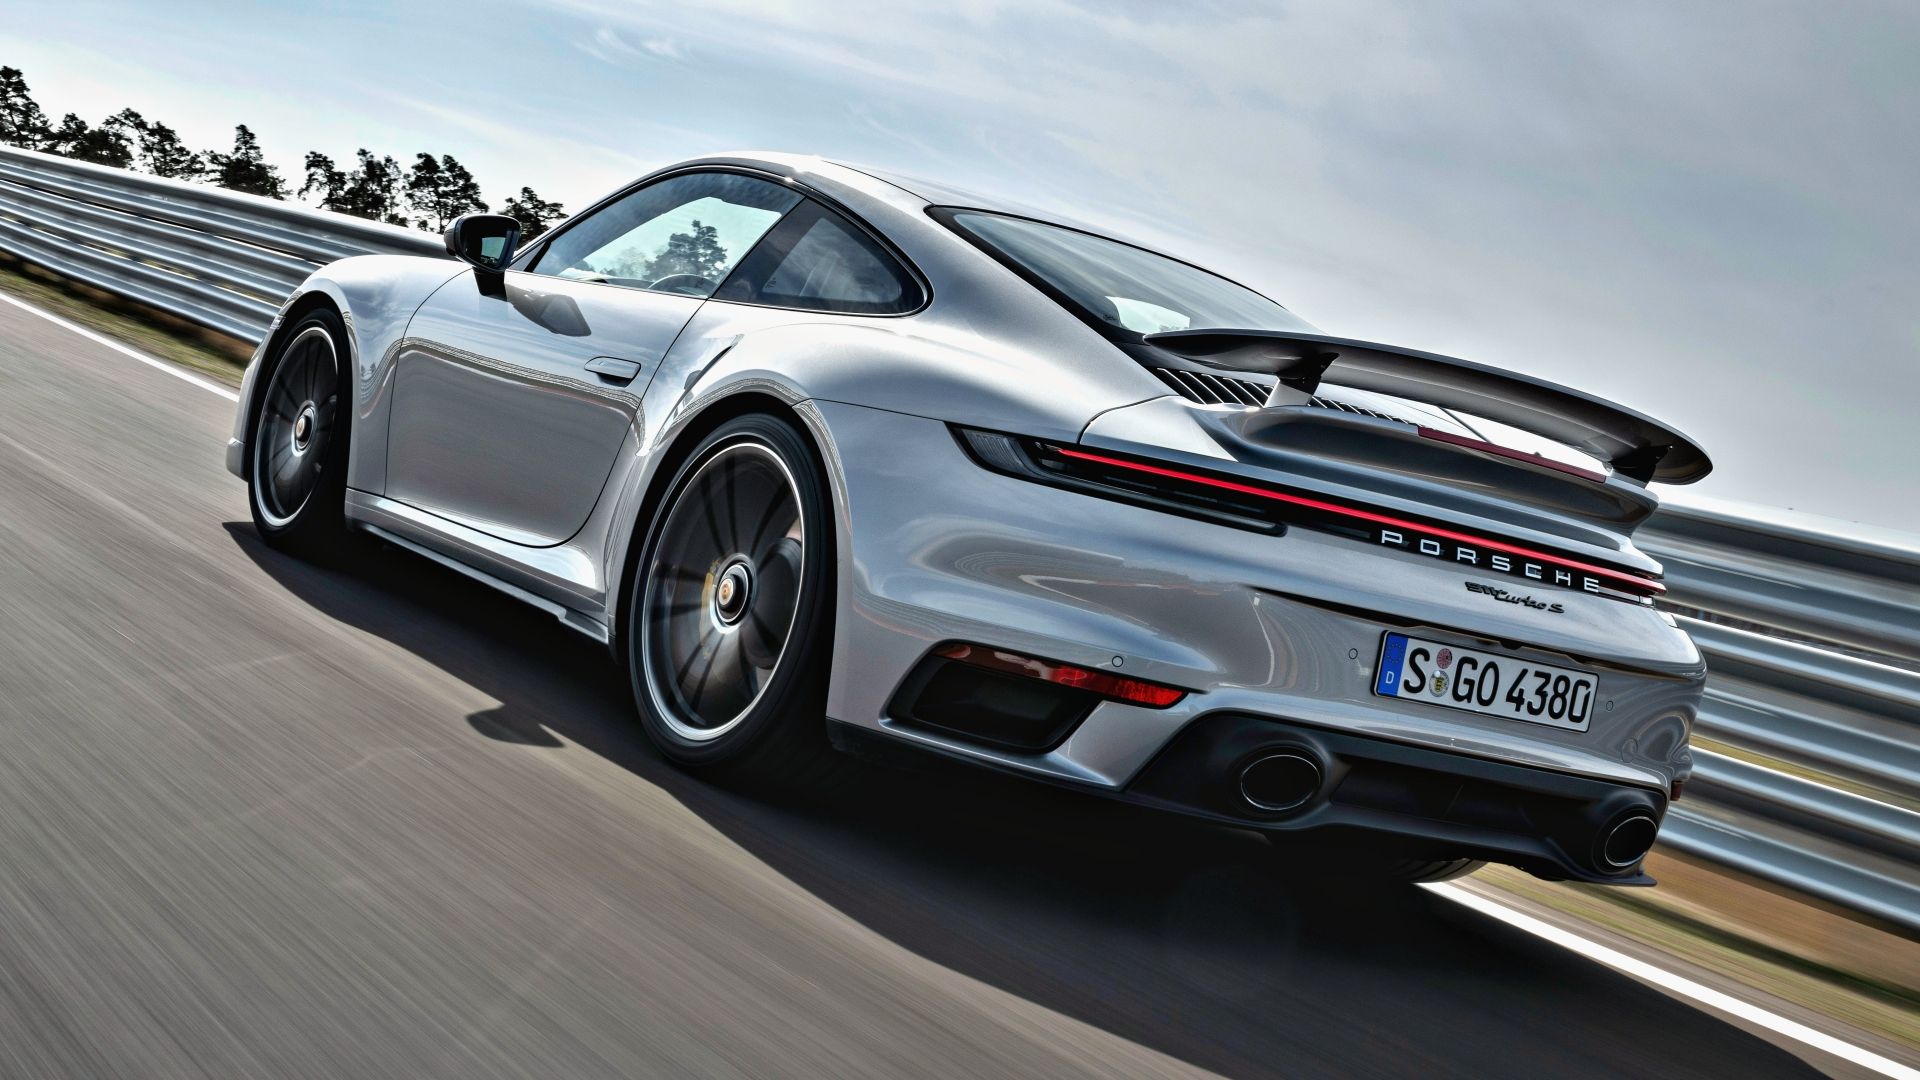 10 Reasons Why The Porsche 911 Turbo Is The Ultimate Sports Car